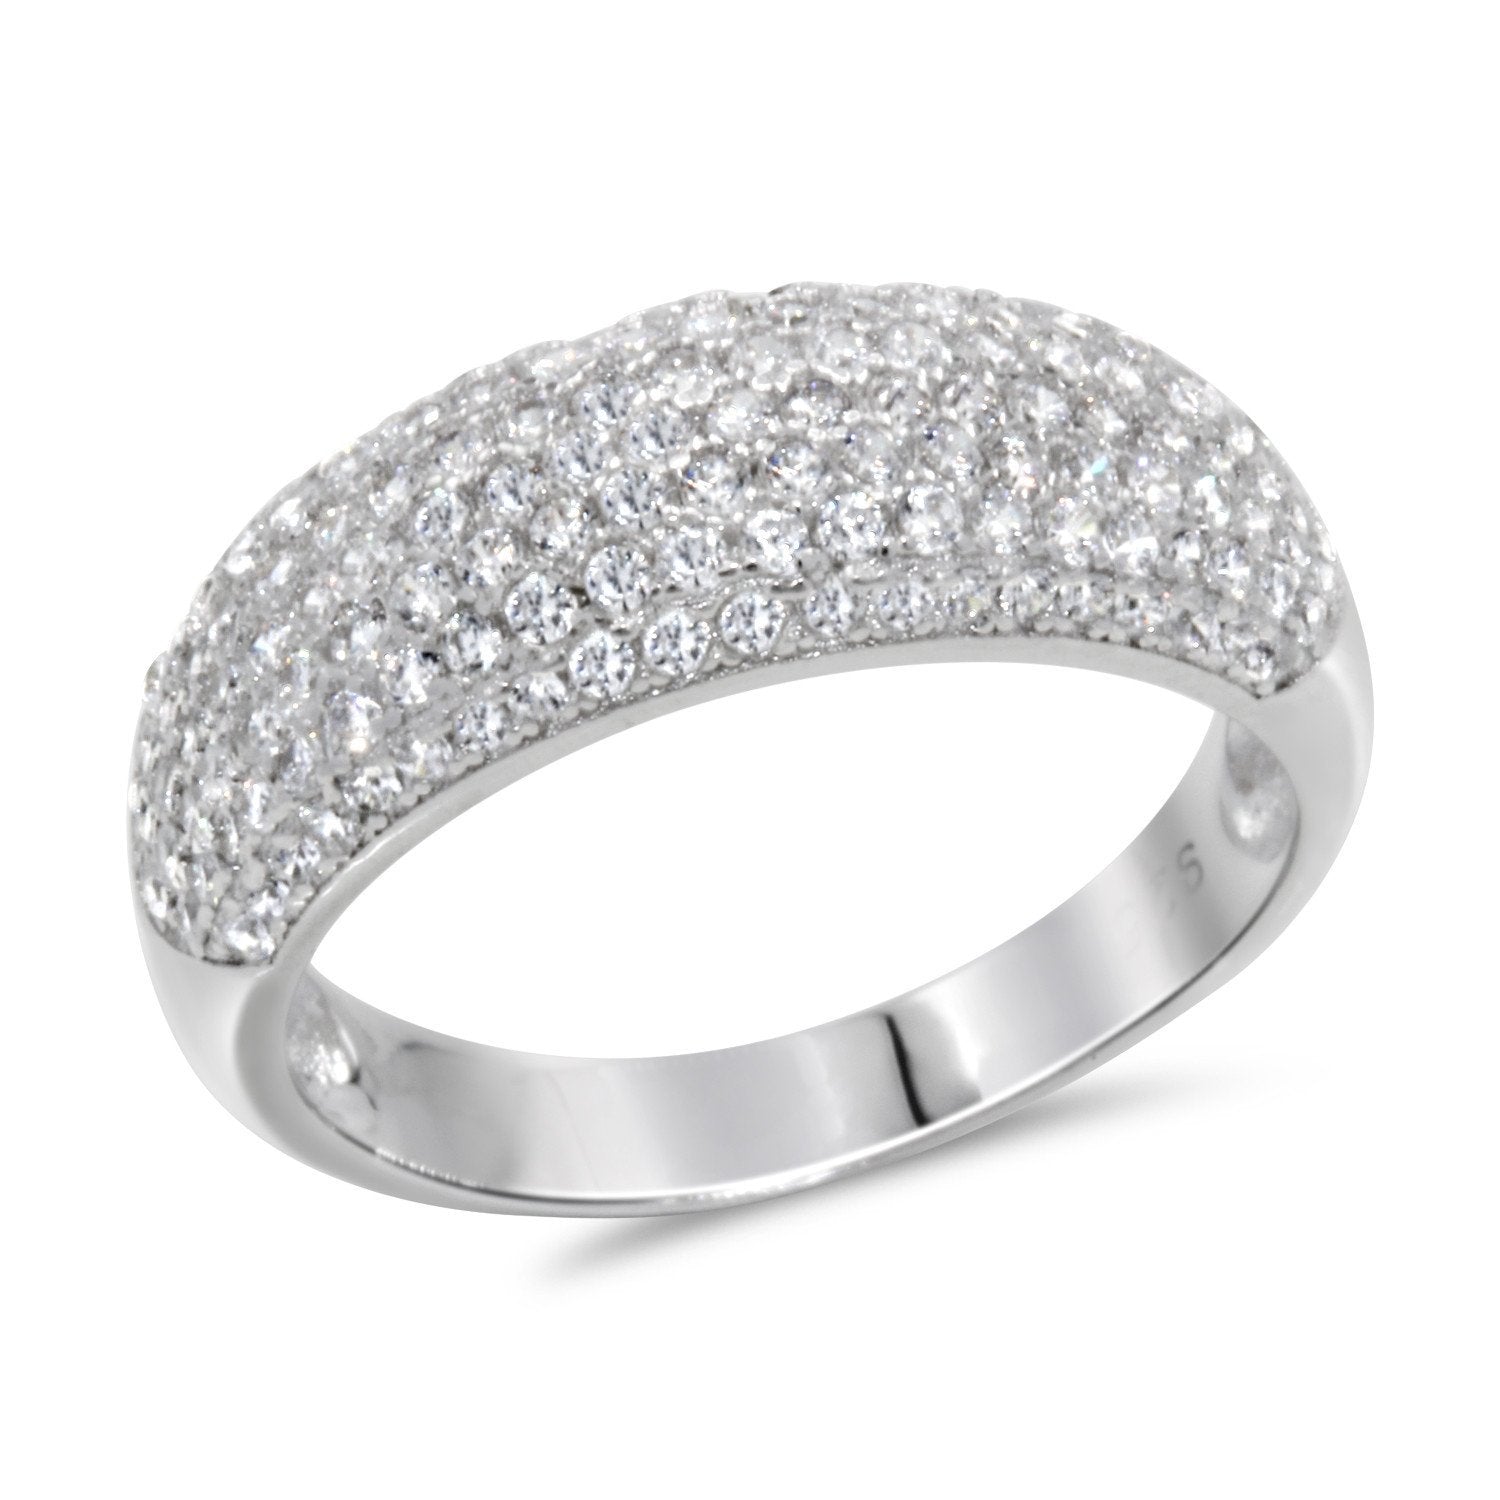 CZ 5mm Sterling Silver Plated Diamond Stimulant Band Engagement Ring